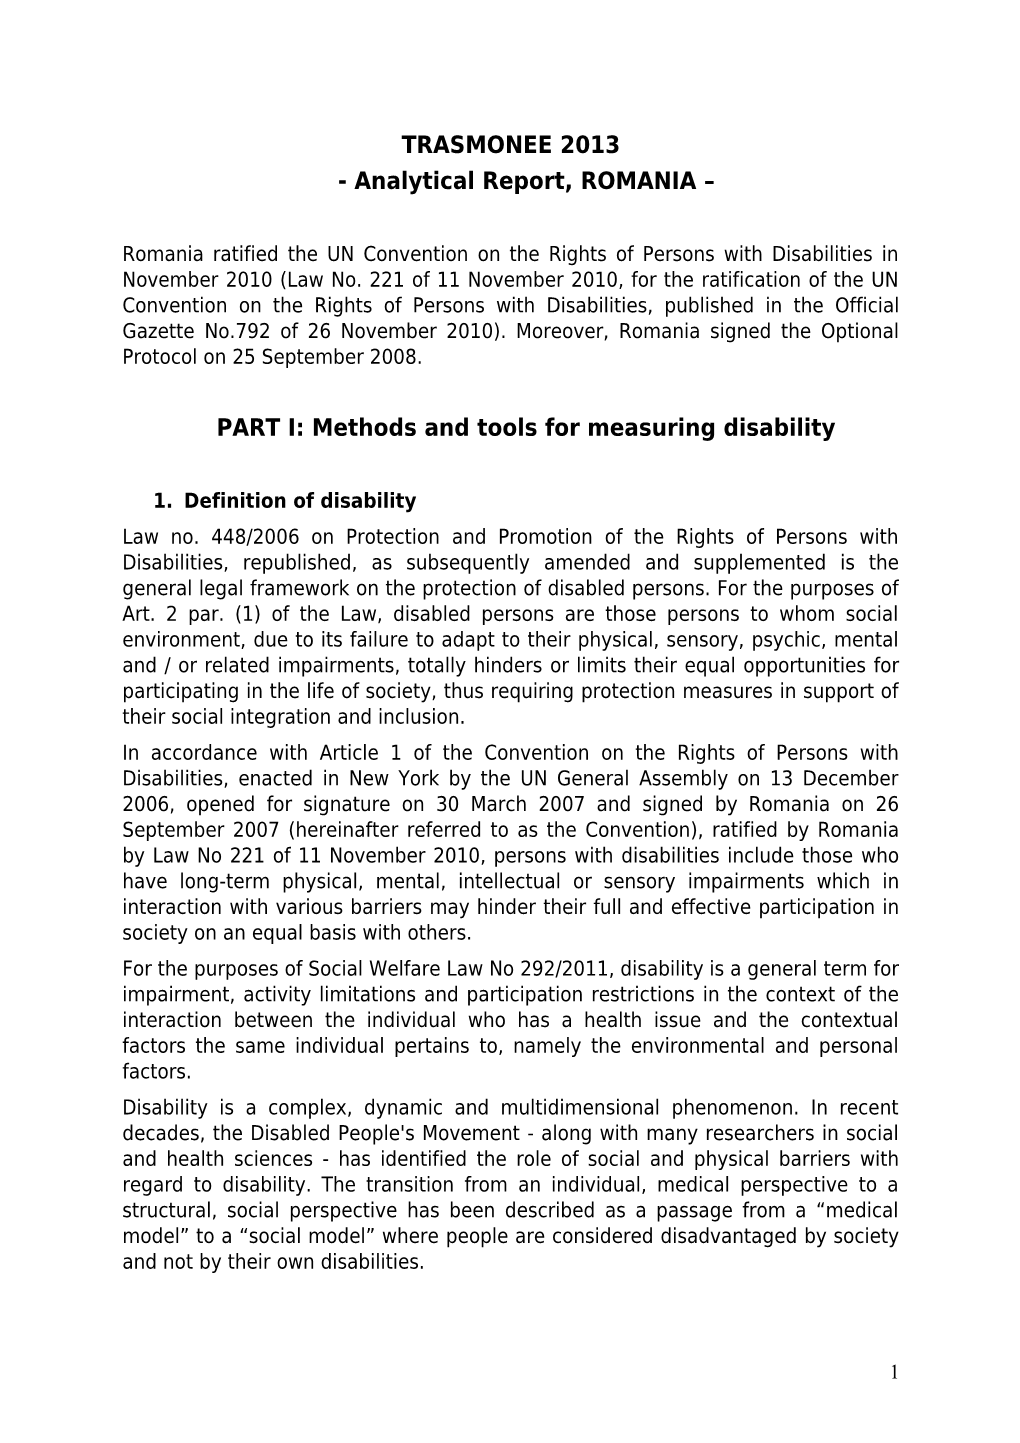 PART I: Methods and Tools for Measuring Disability